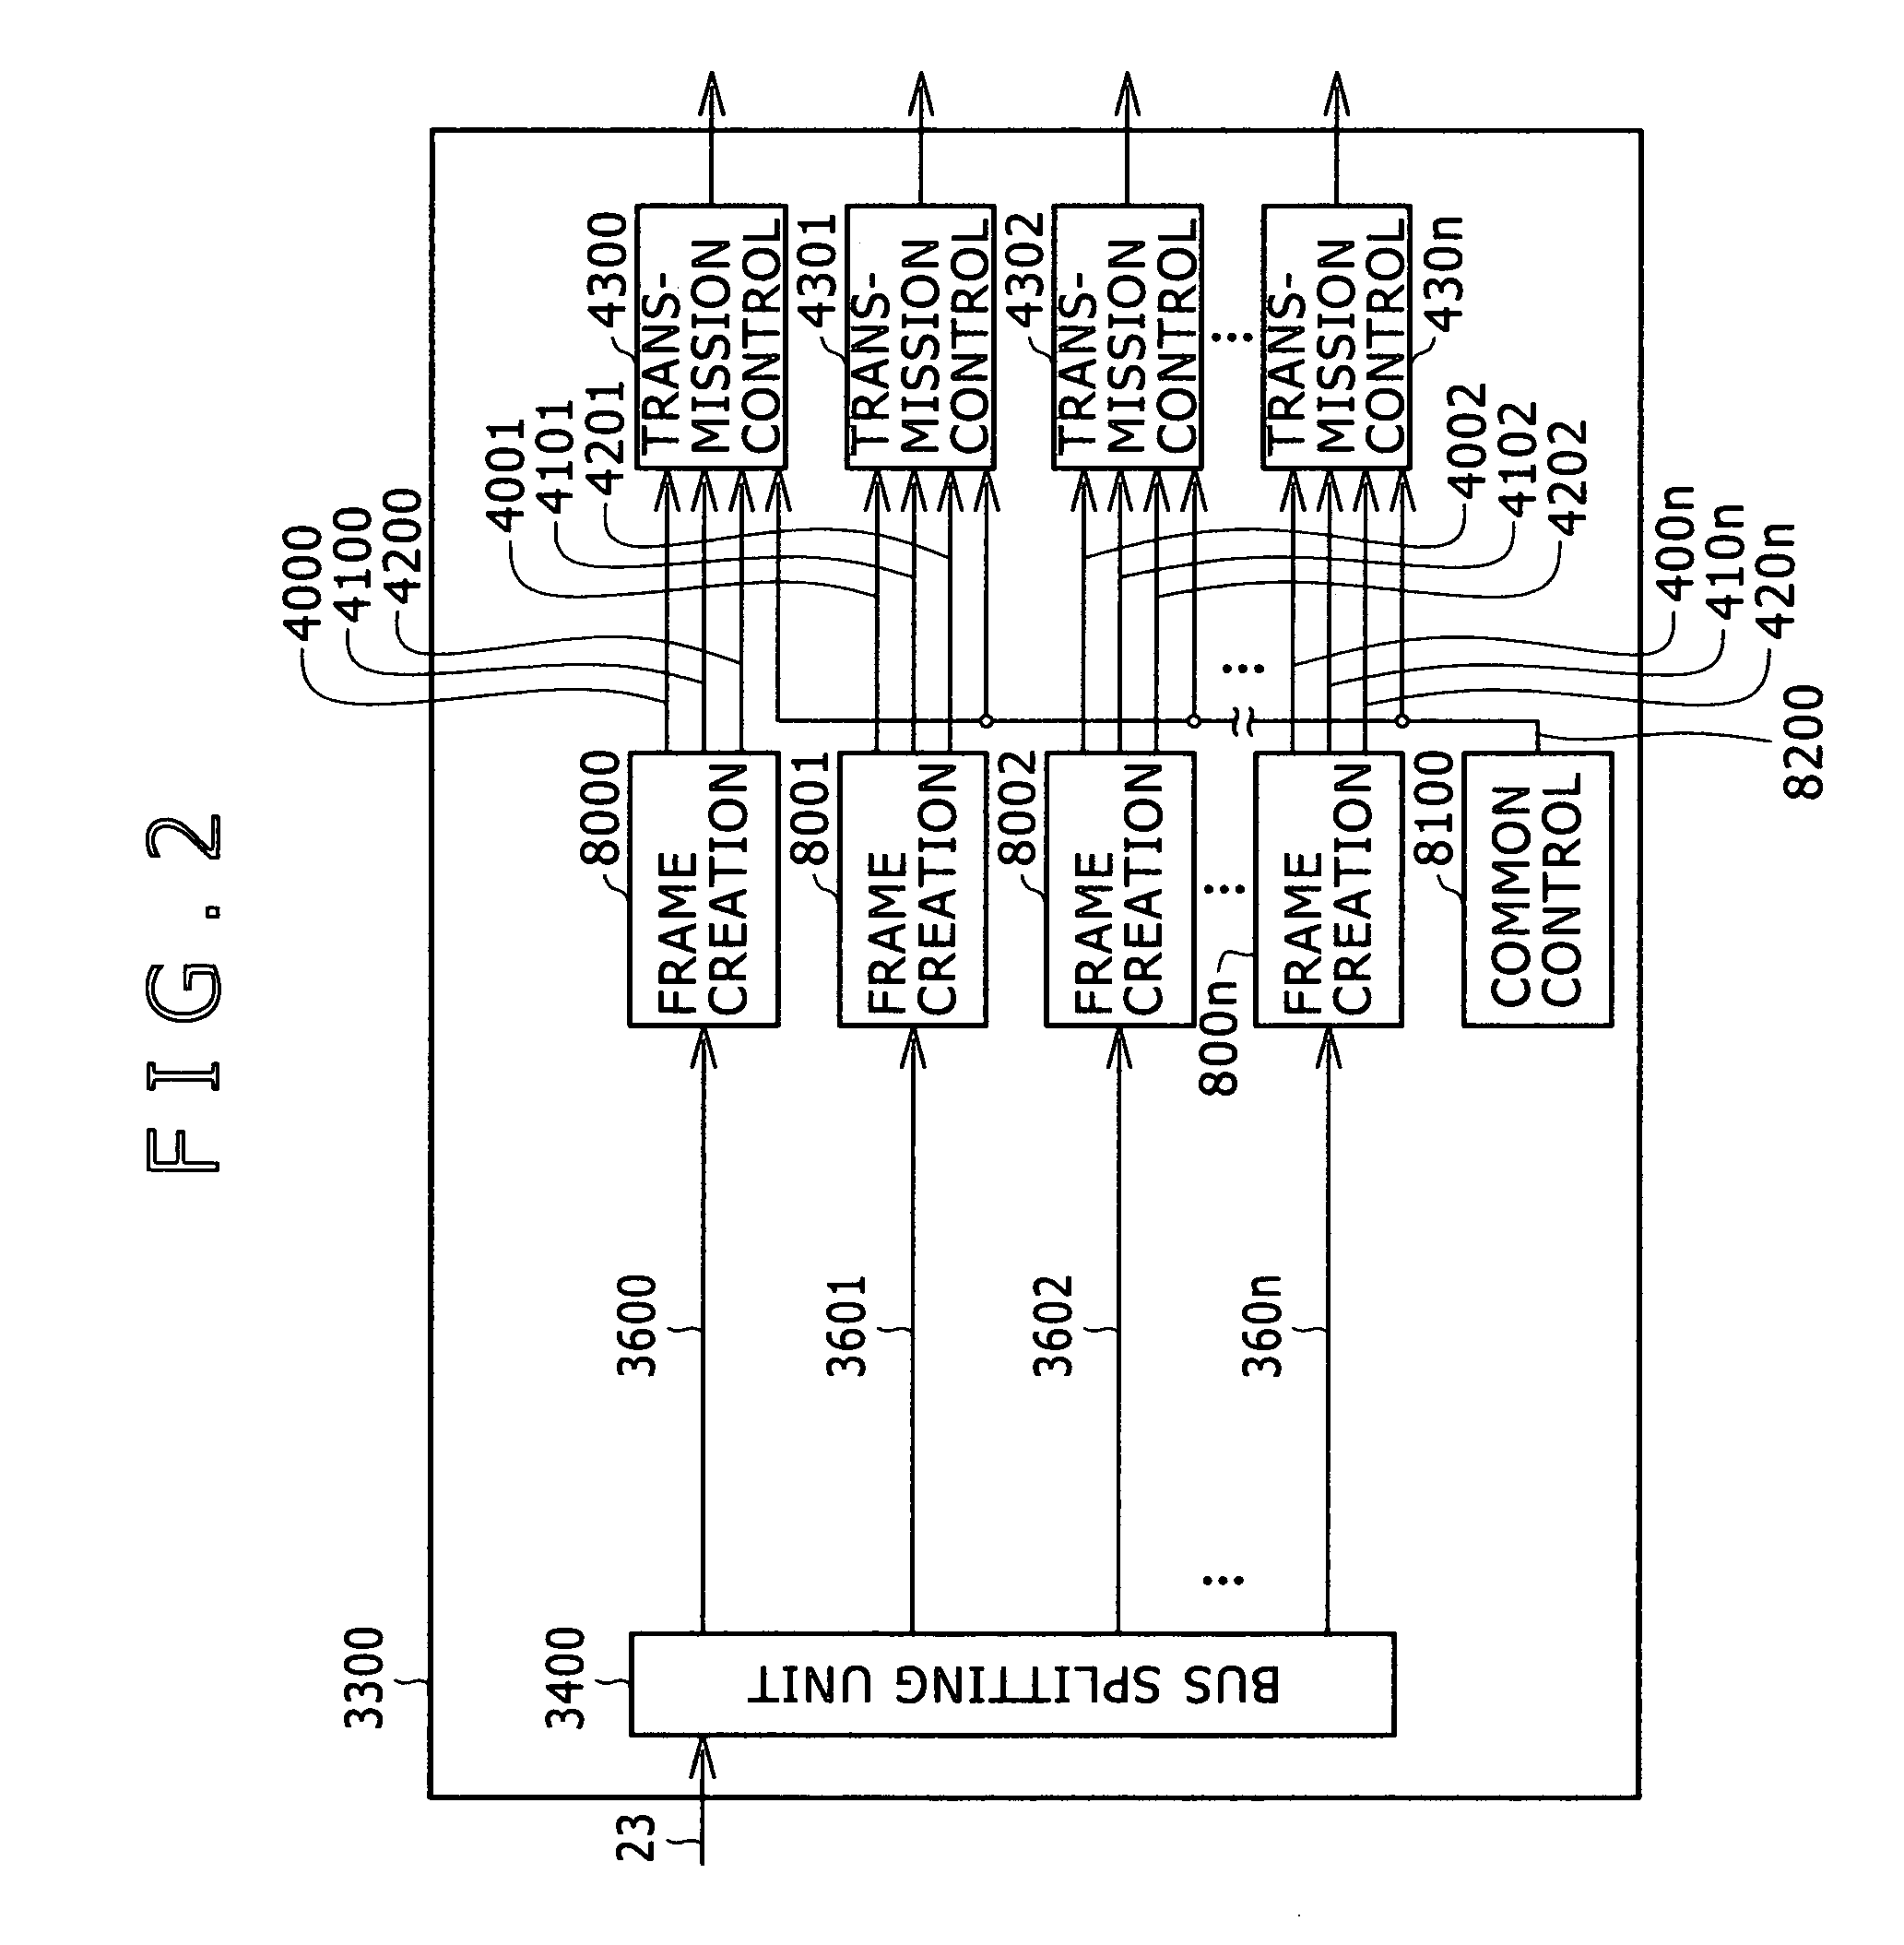 Semiconductor inspecting apparatus